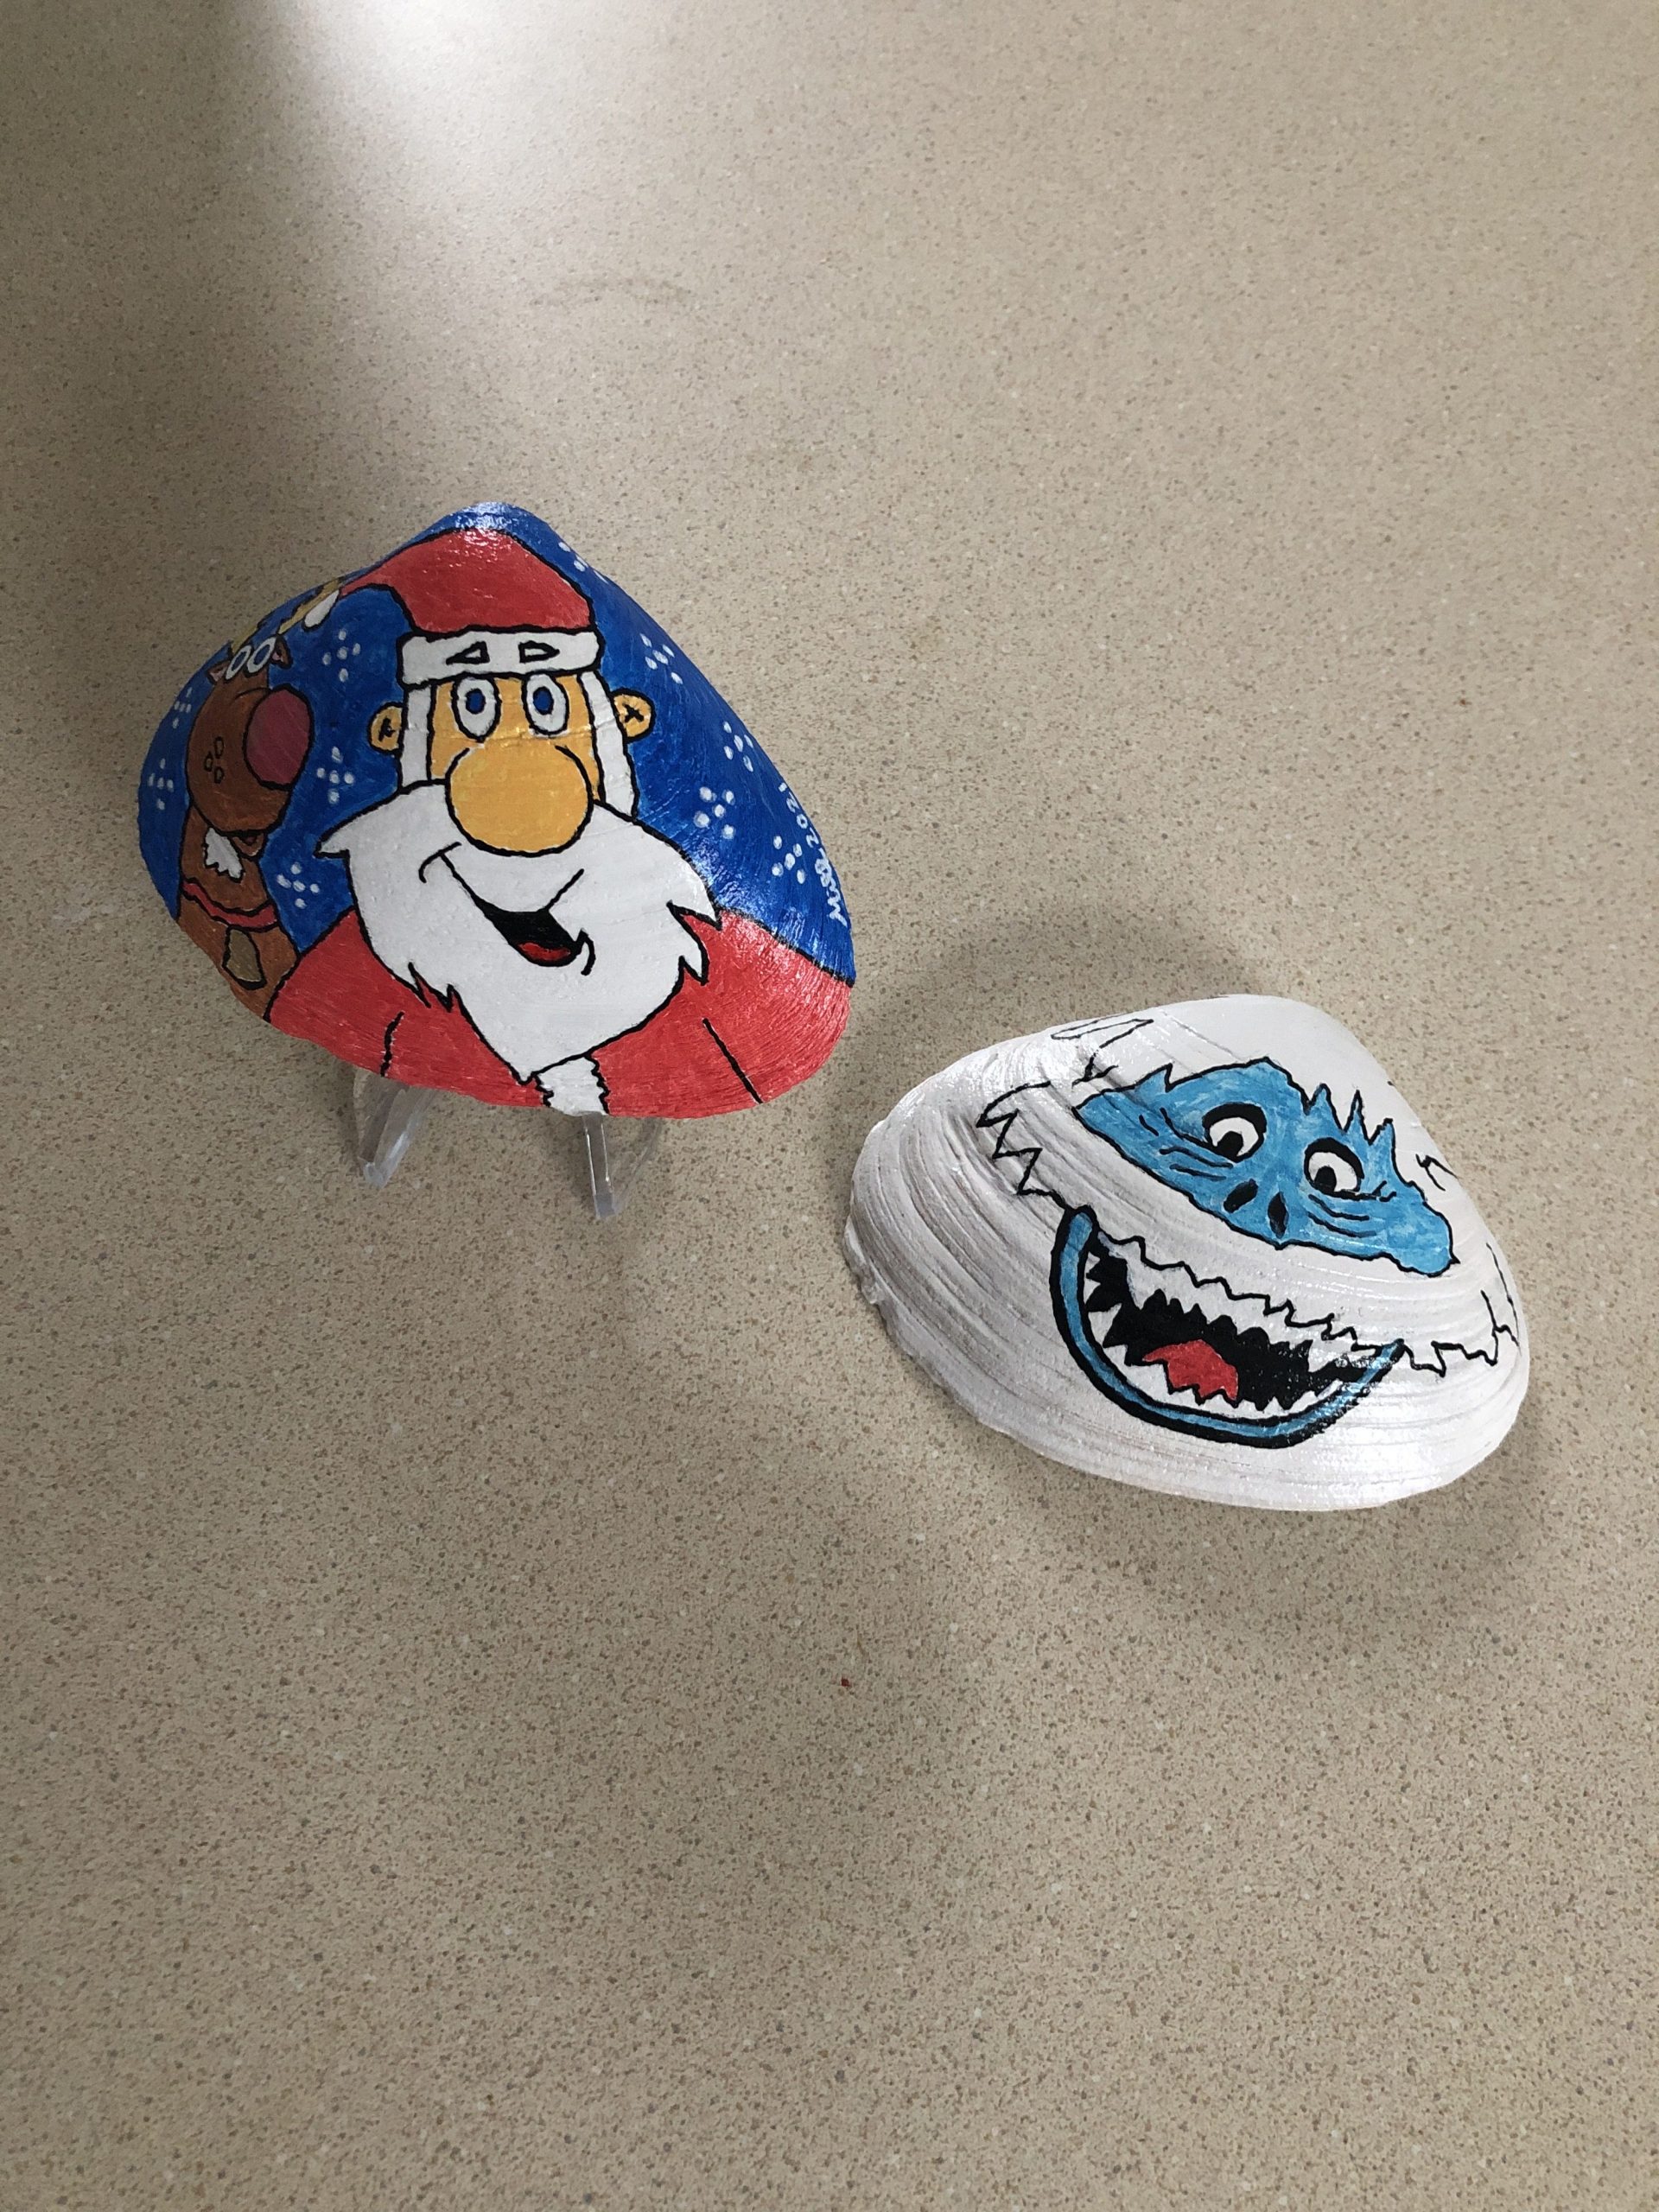 Hand painted Santa and Abominable Snowman on shells